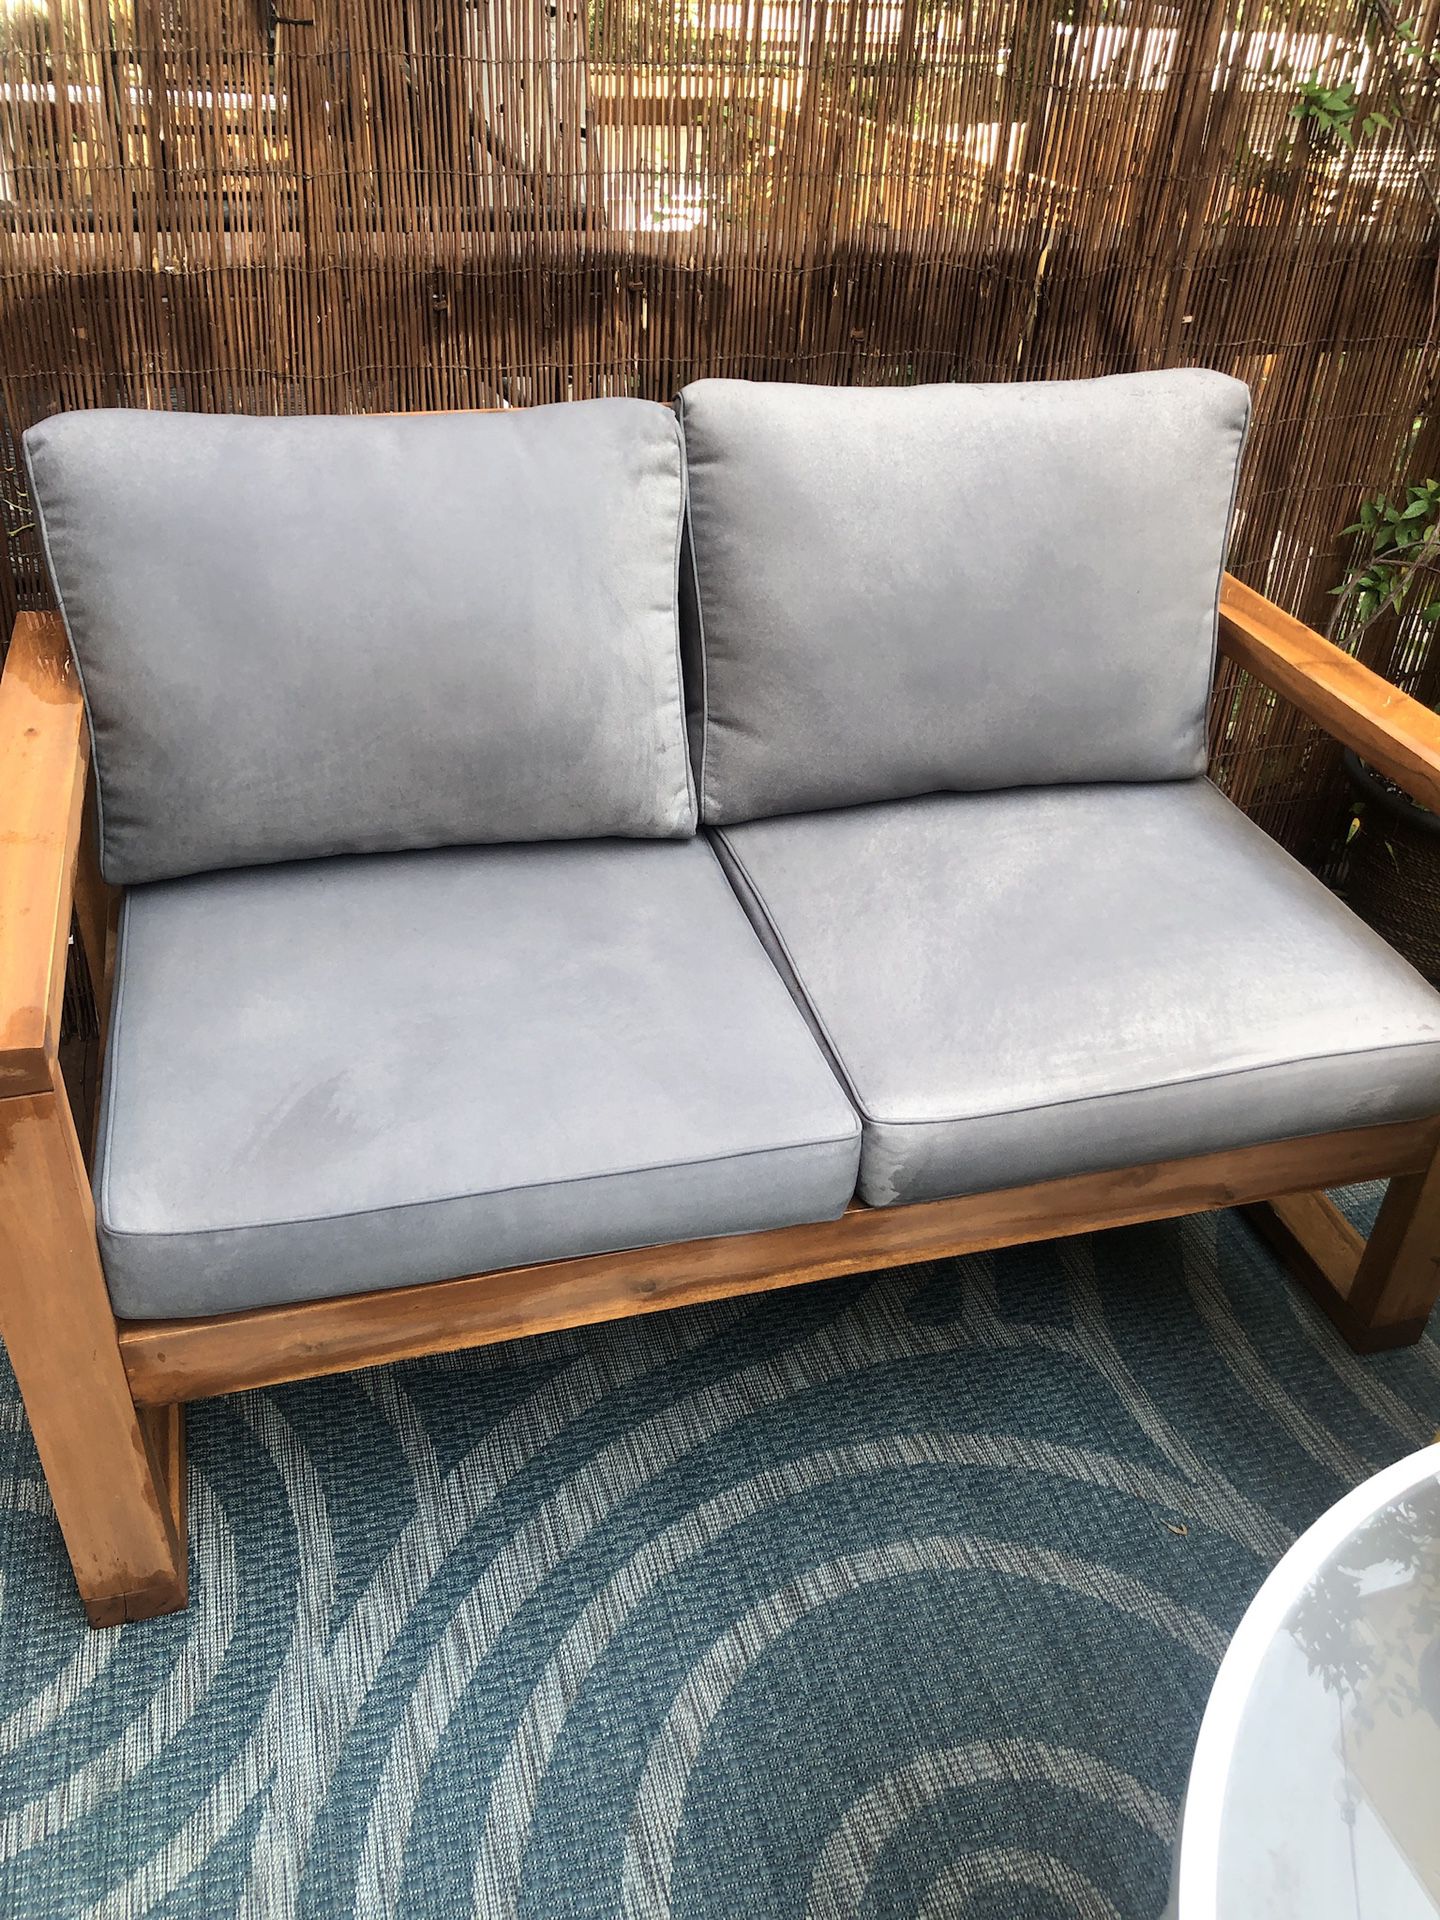 Outdoor sofa loveseat and cover